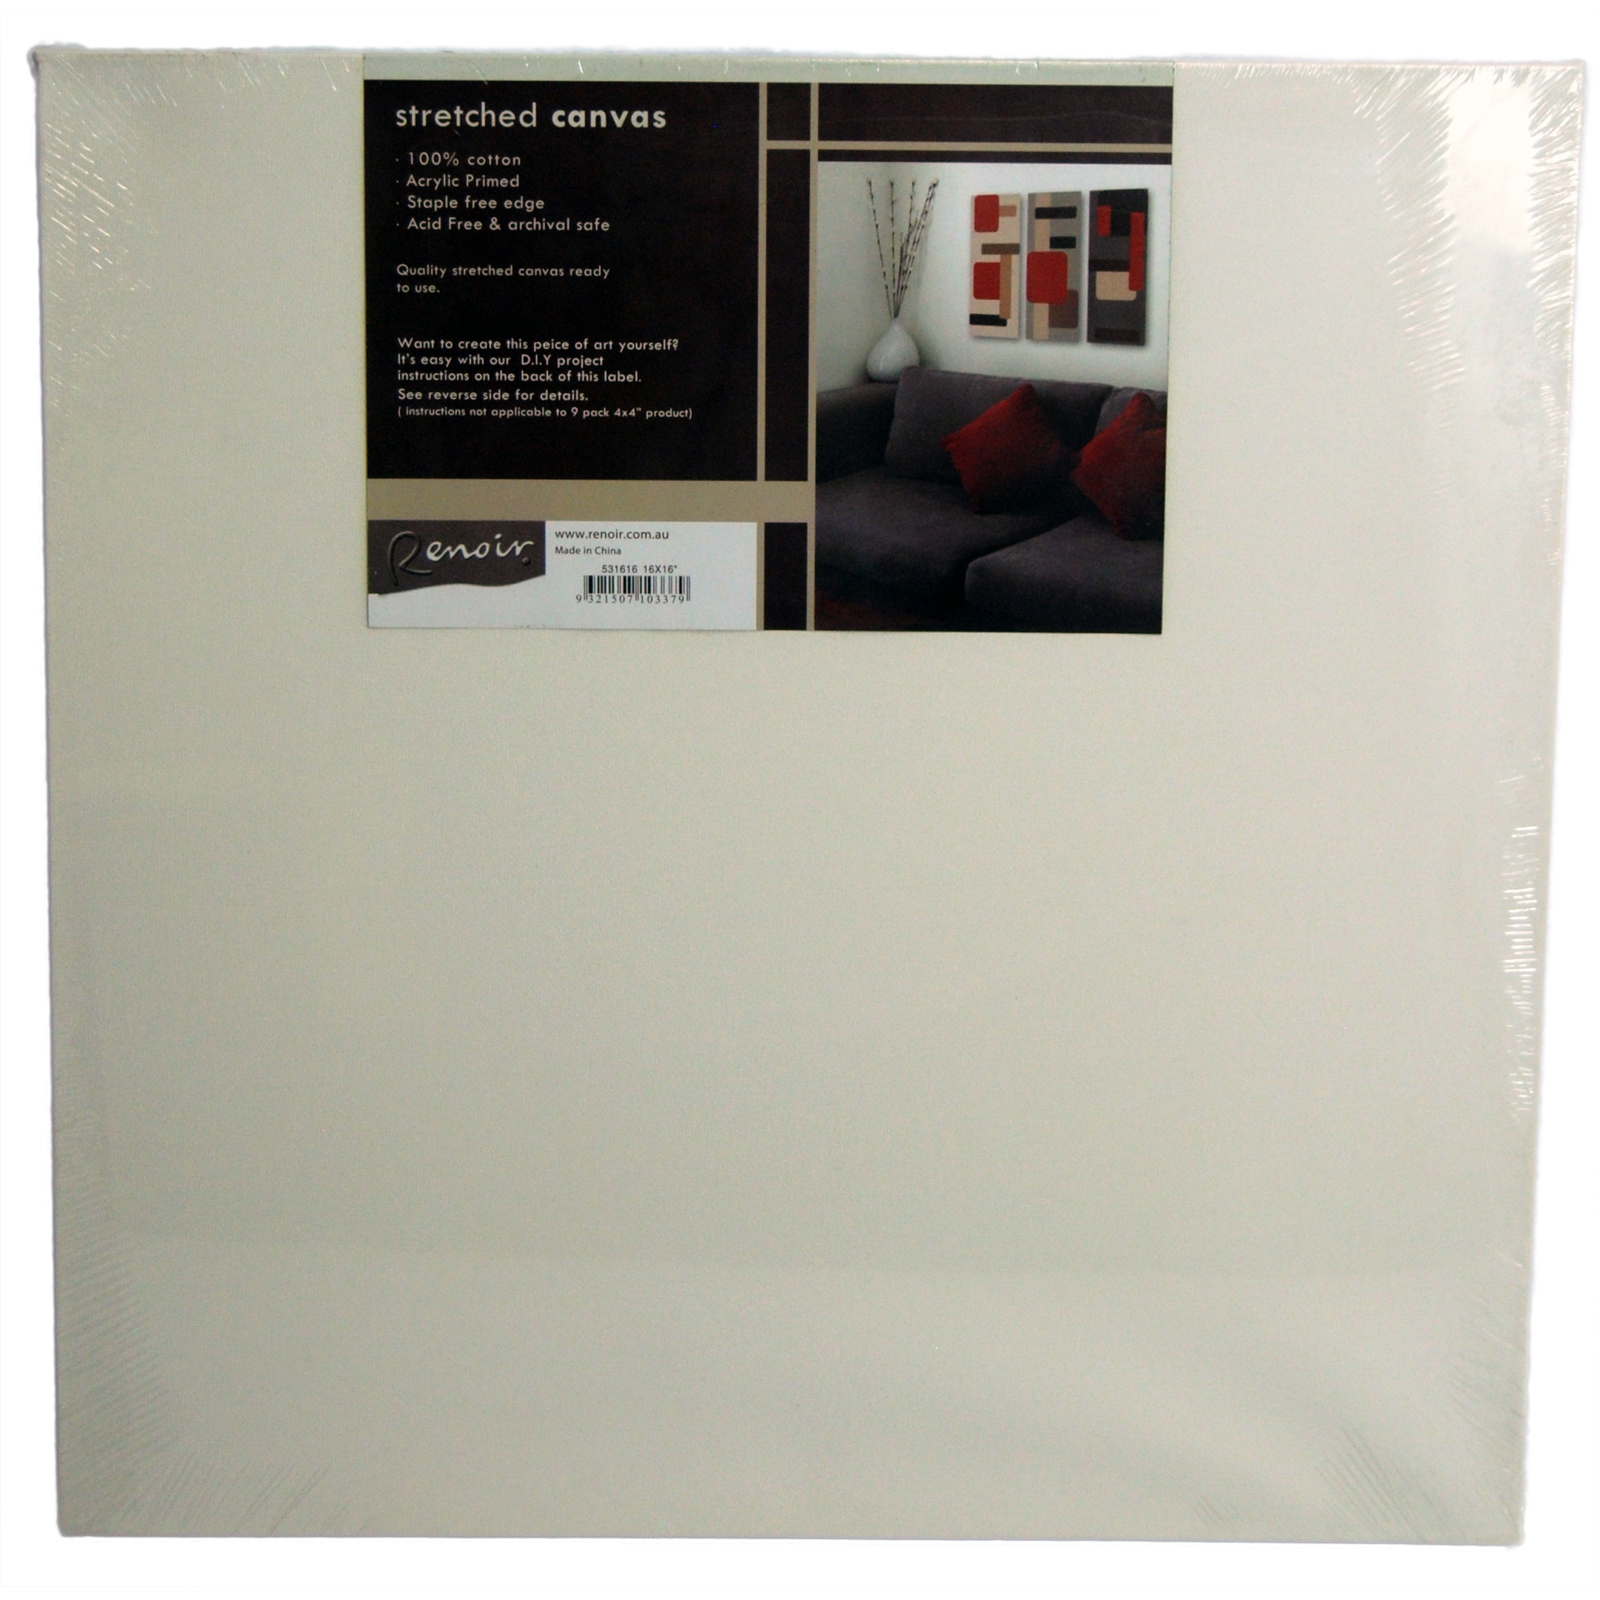 Renoir Wide Profile Stretched Canvas  - 406mm x 406mm